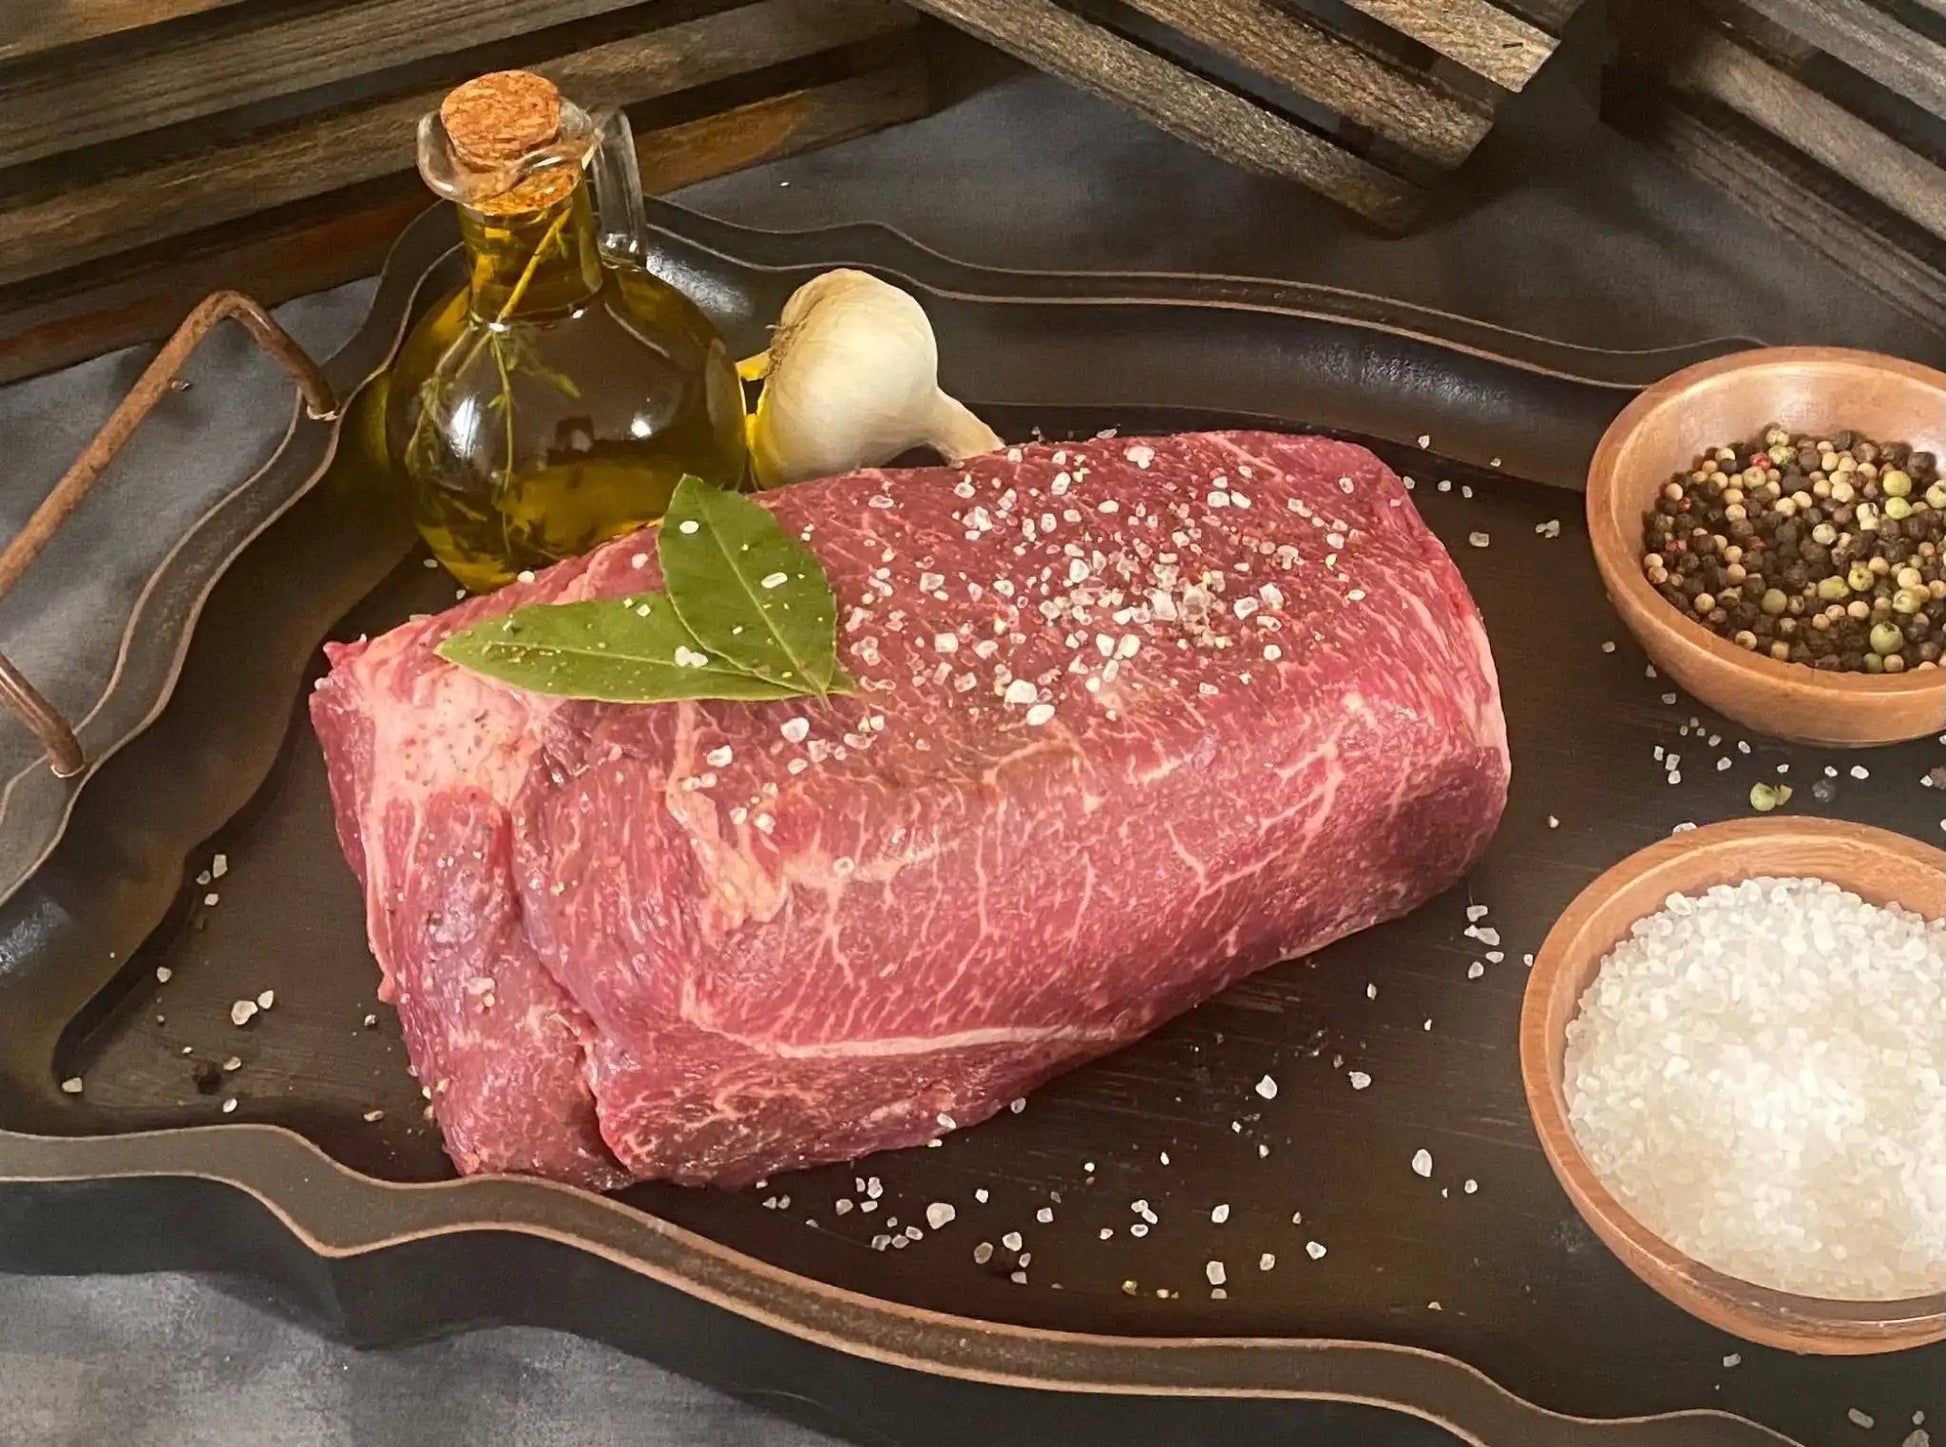 100% All-Natural Grass-Fed American Wagyu Arm Roast - The Hufeisen-Ranch (WYO Wagyu)